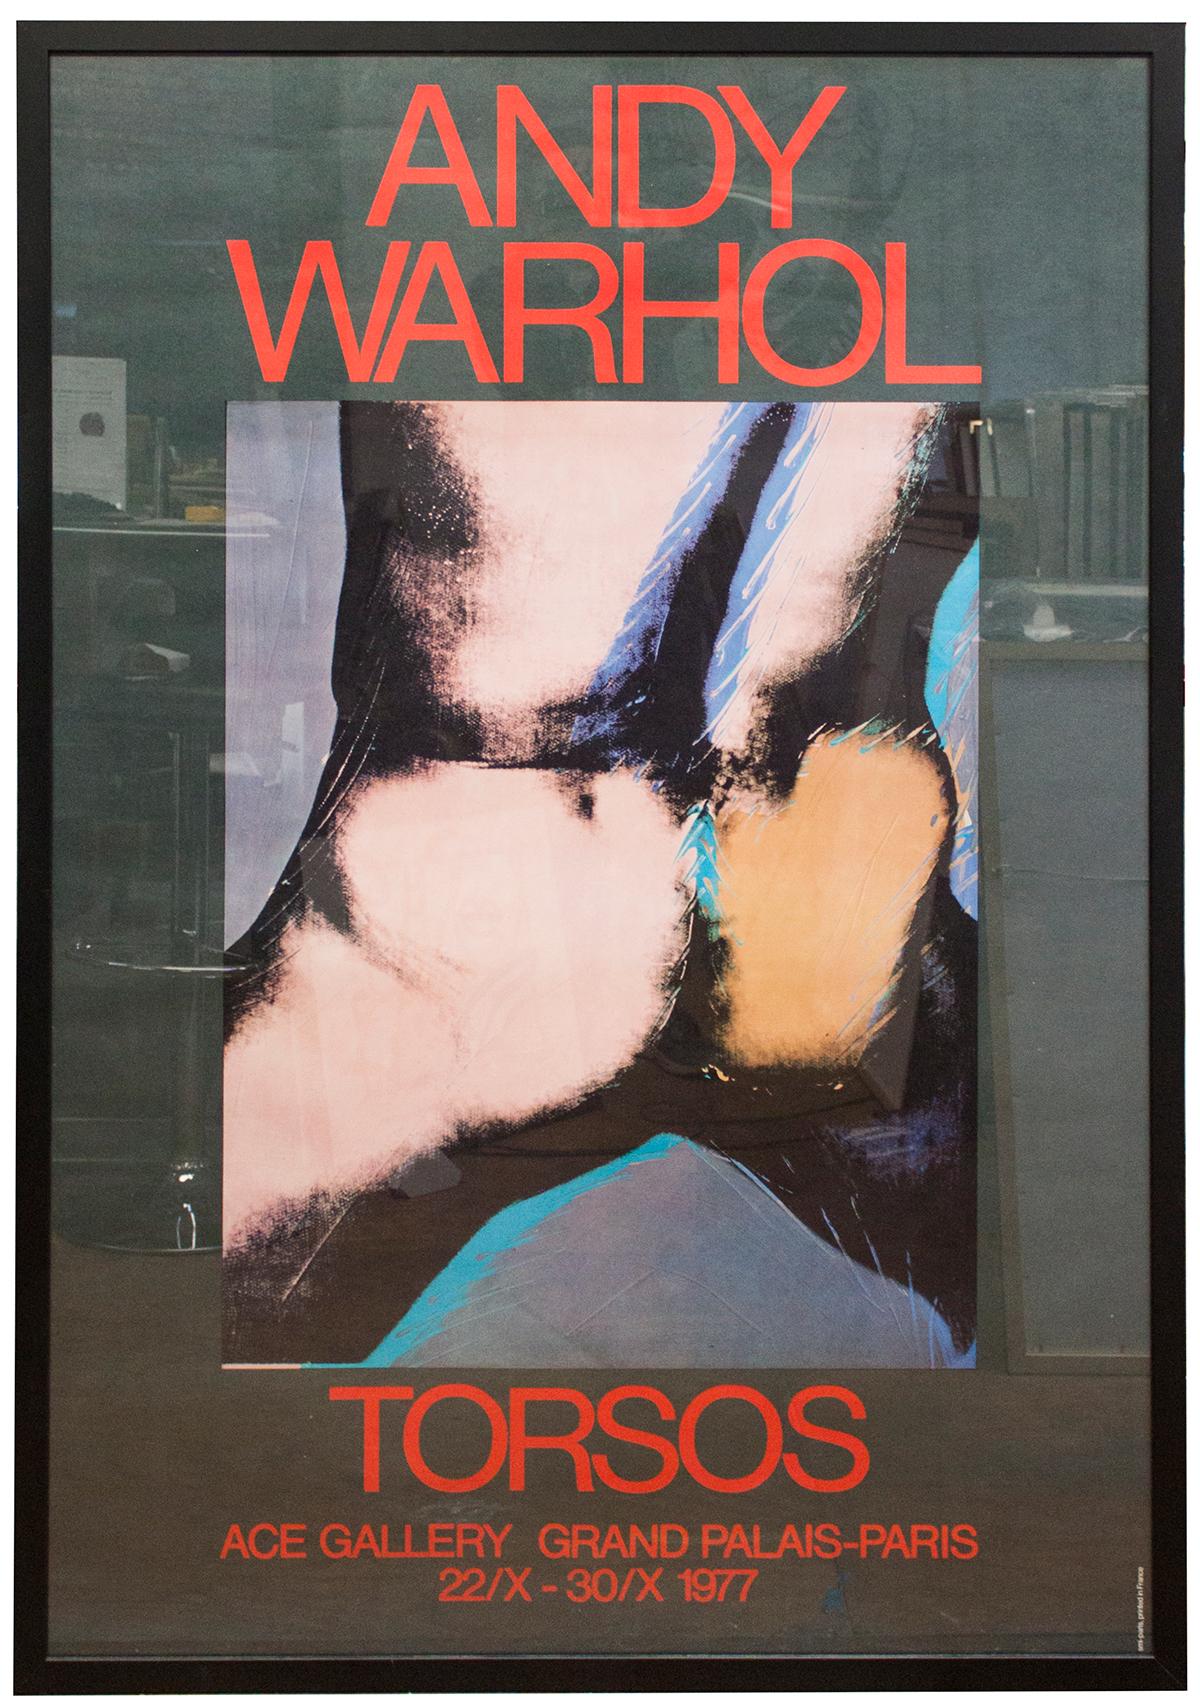 Andy Warhol-Torsos-60" x 40"-Poster-1977-Pop Art-Multicolor - Print by (after) Andy Warhol